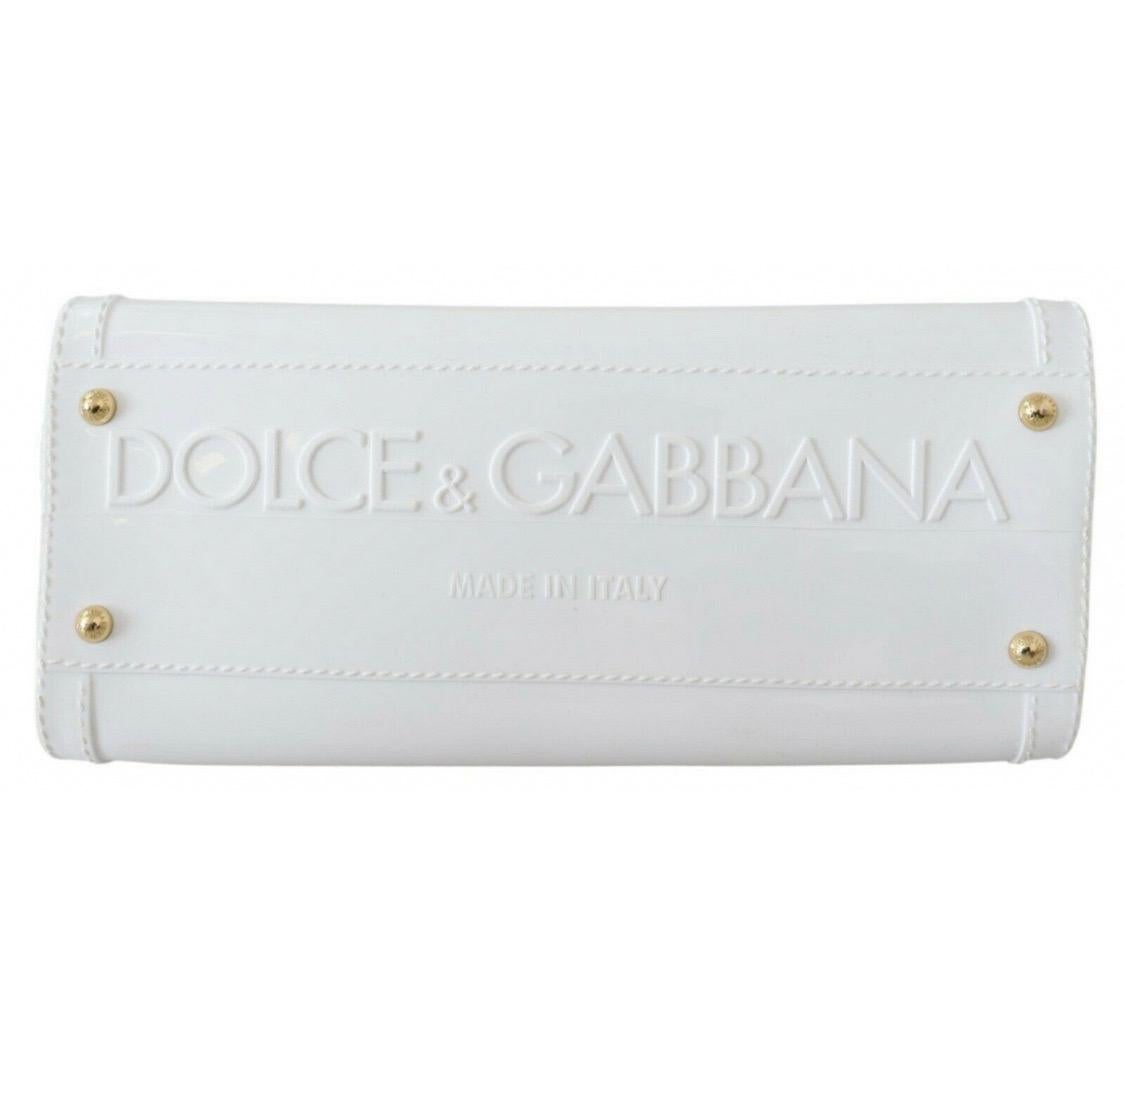 Dolce & Gabbana white leather SICILY PVC shoulder bag In New Condition For Sale In WELWYN, GB